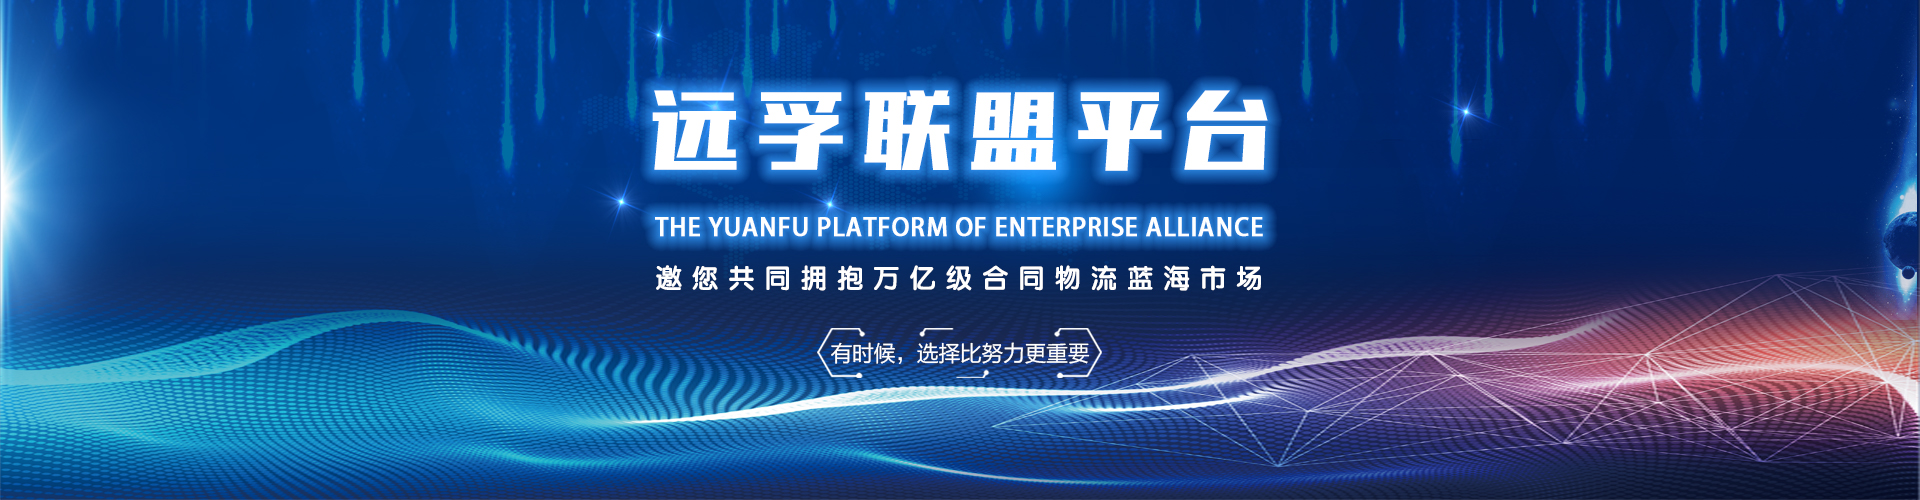 Cases of Electronic and Electrical Appliances_Yuanfu Logistics Group Co.,Ltd.—Serving our customer to focus on core business,win-win on the supply chain【official website】